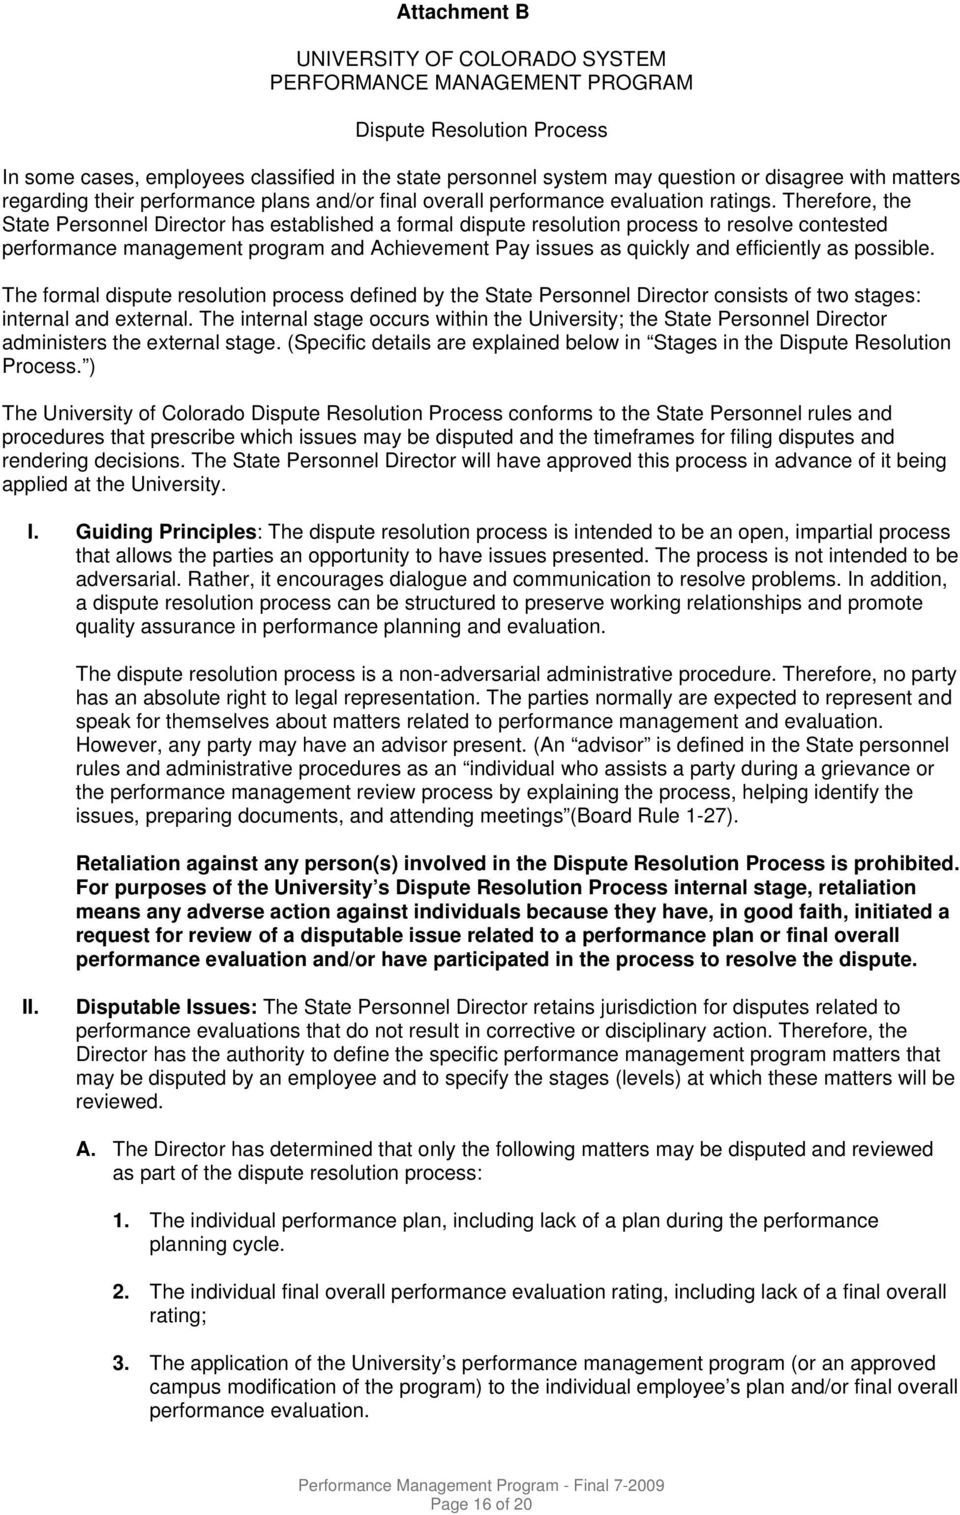 Therefore, the State Personnel Director has established a formal dispute resolution process to resolve contested performance management program and Achievement Pay issues as quickly and efficiently